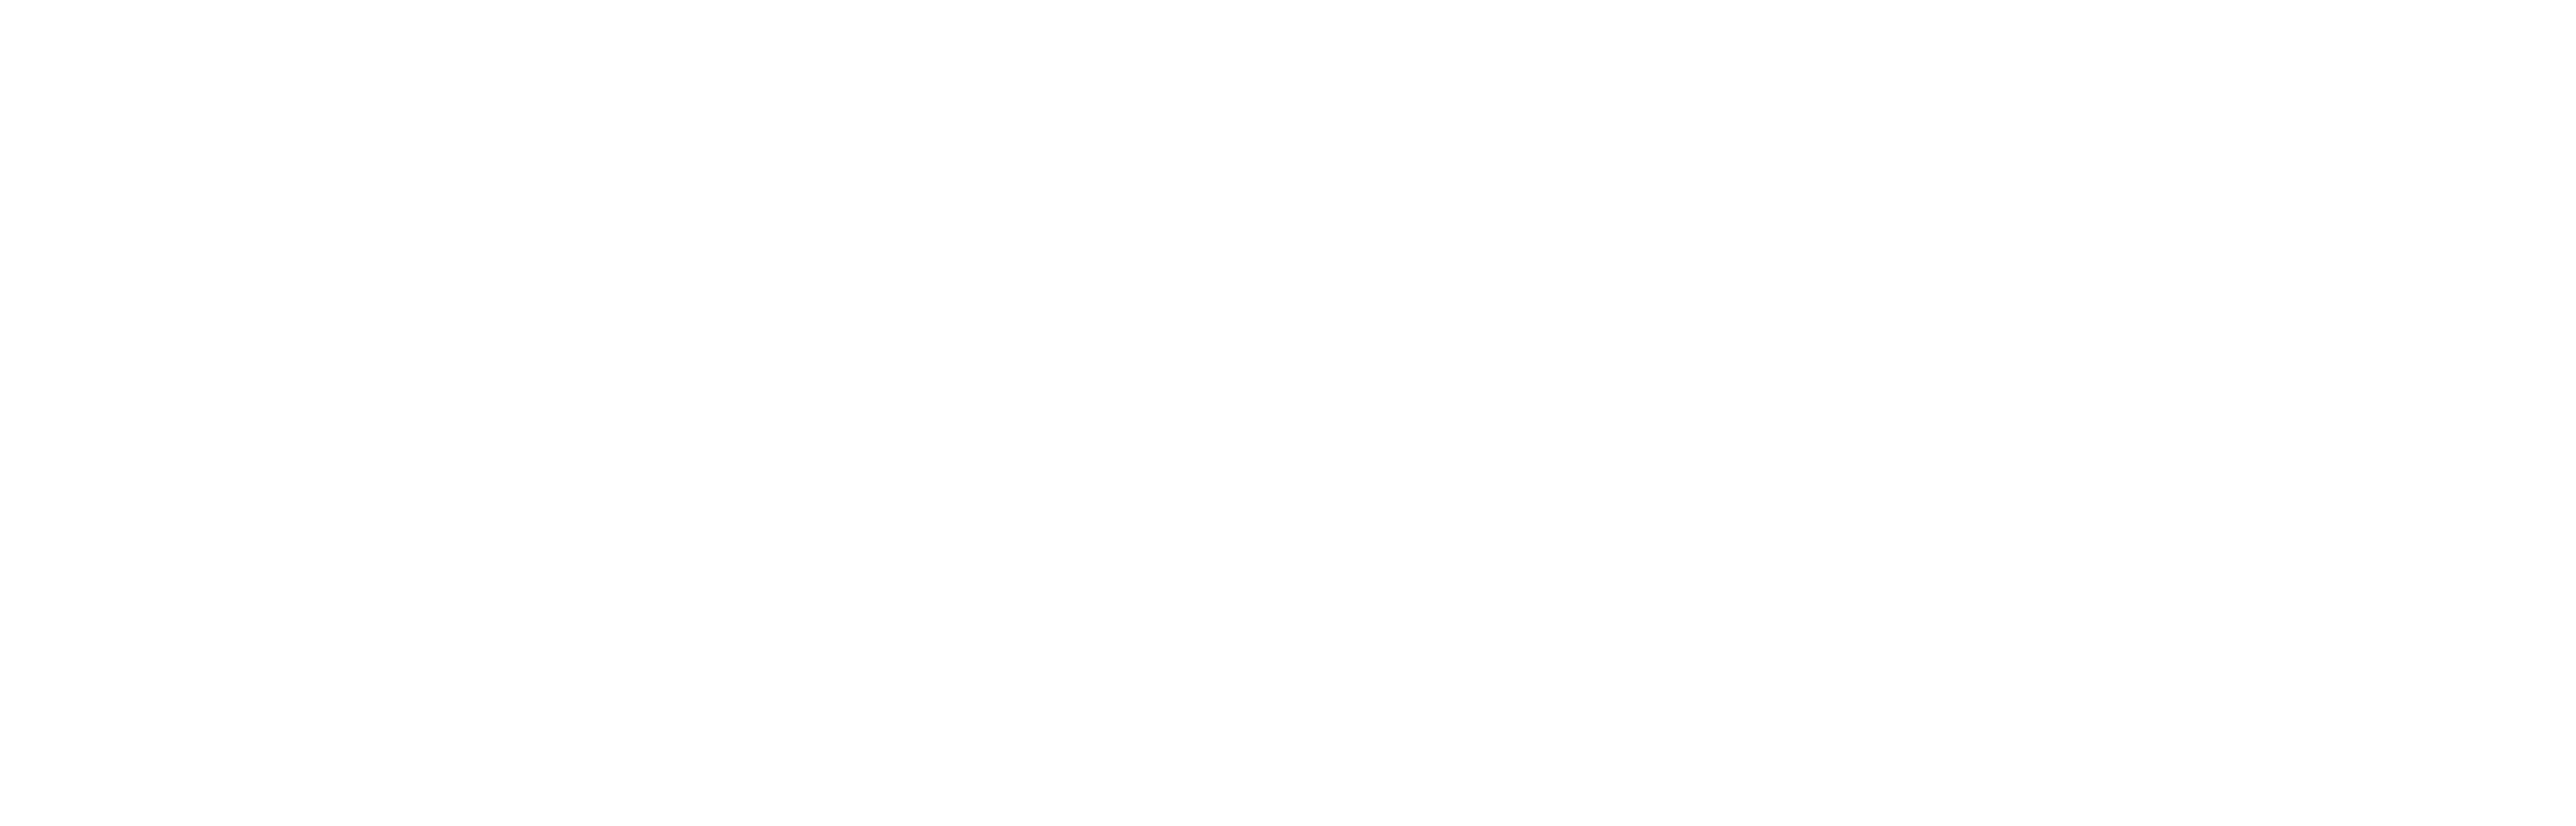 Global insights, debate and discourse on AI solutions and critical issues